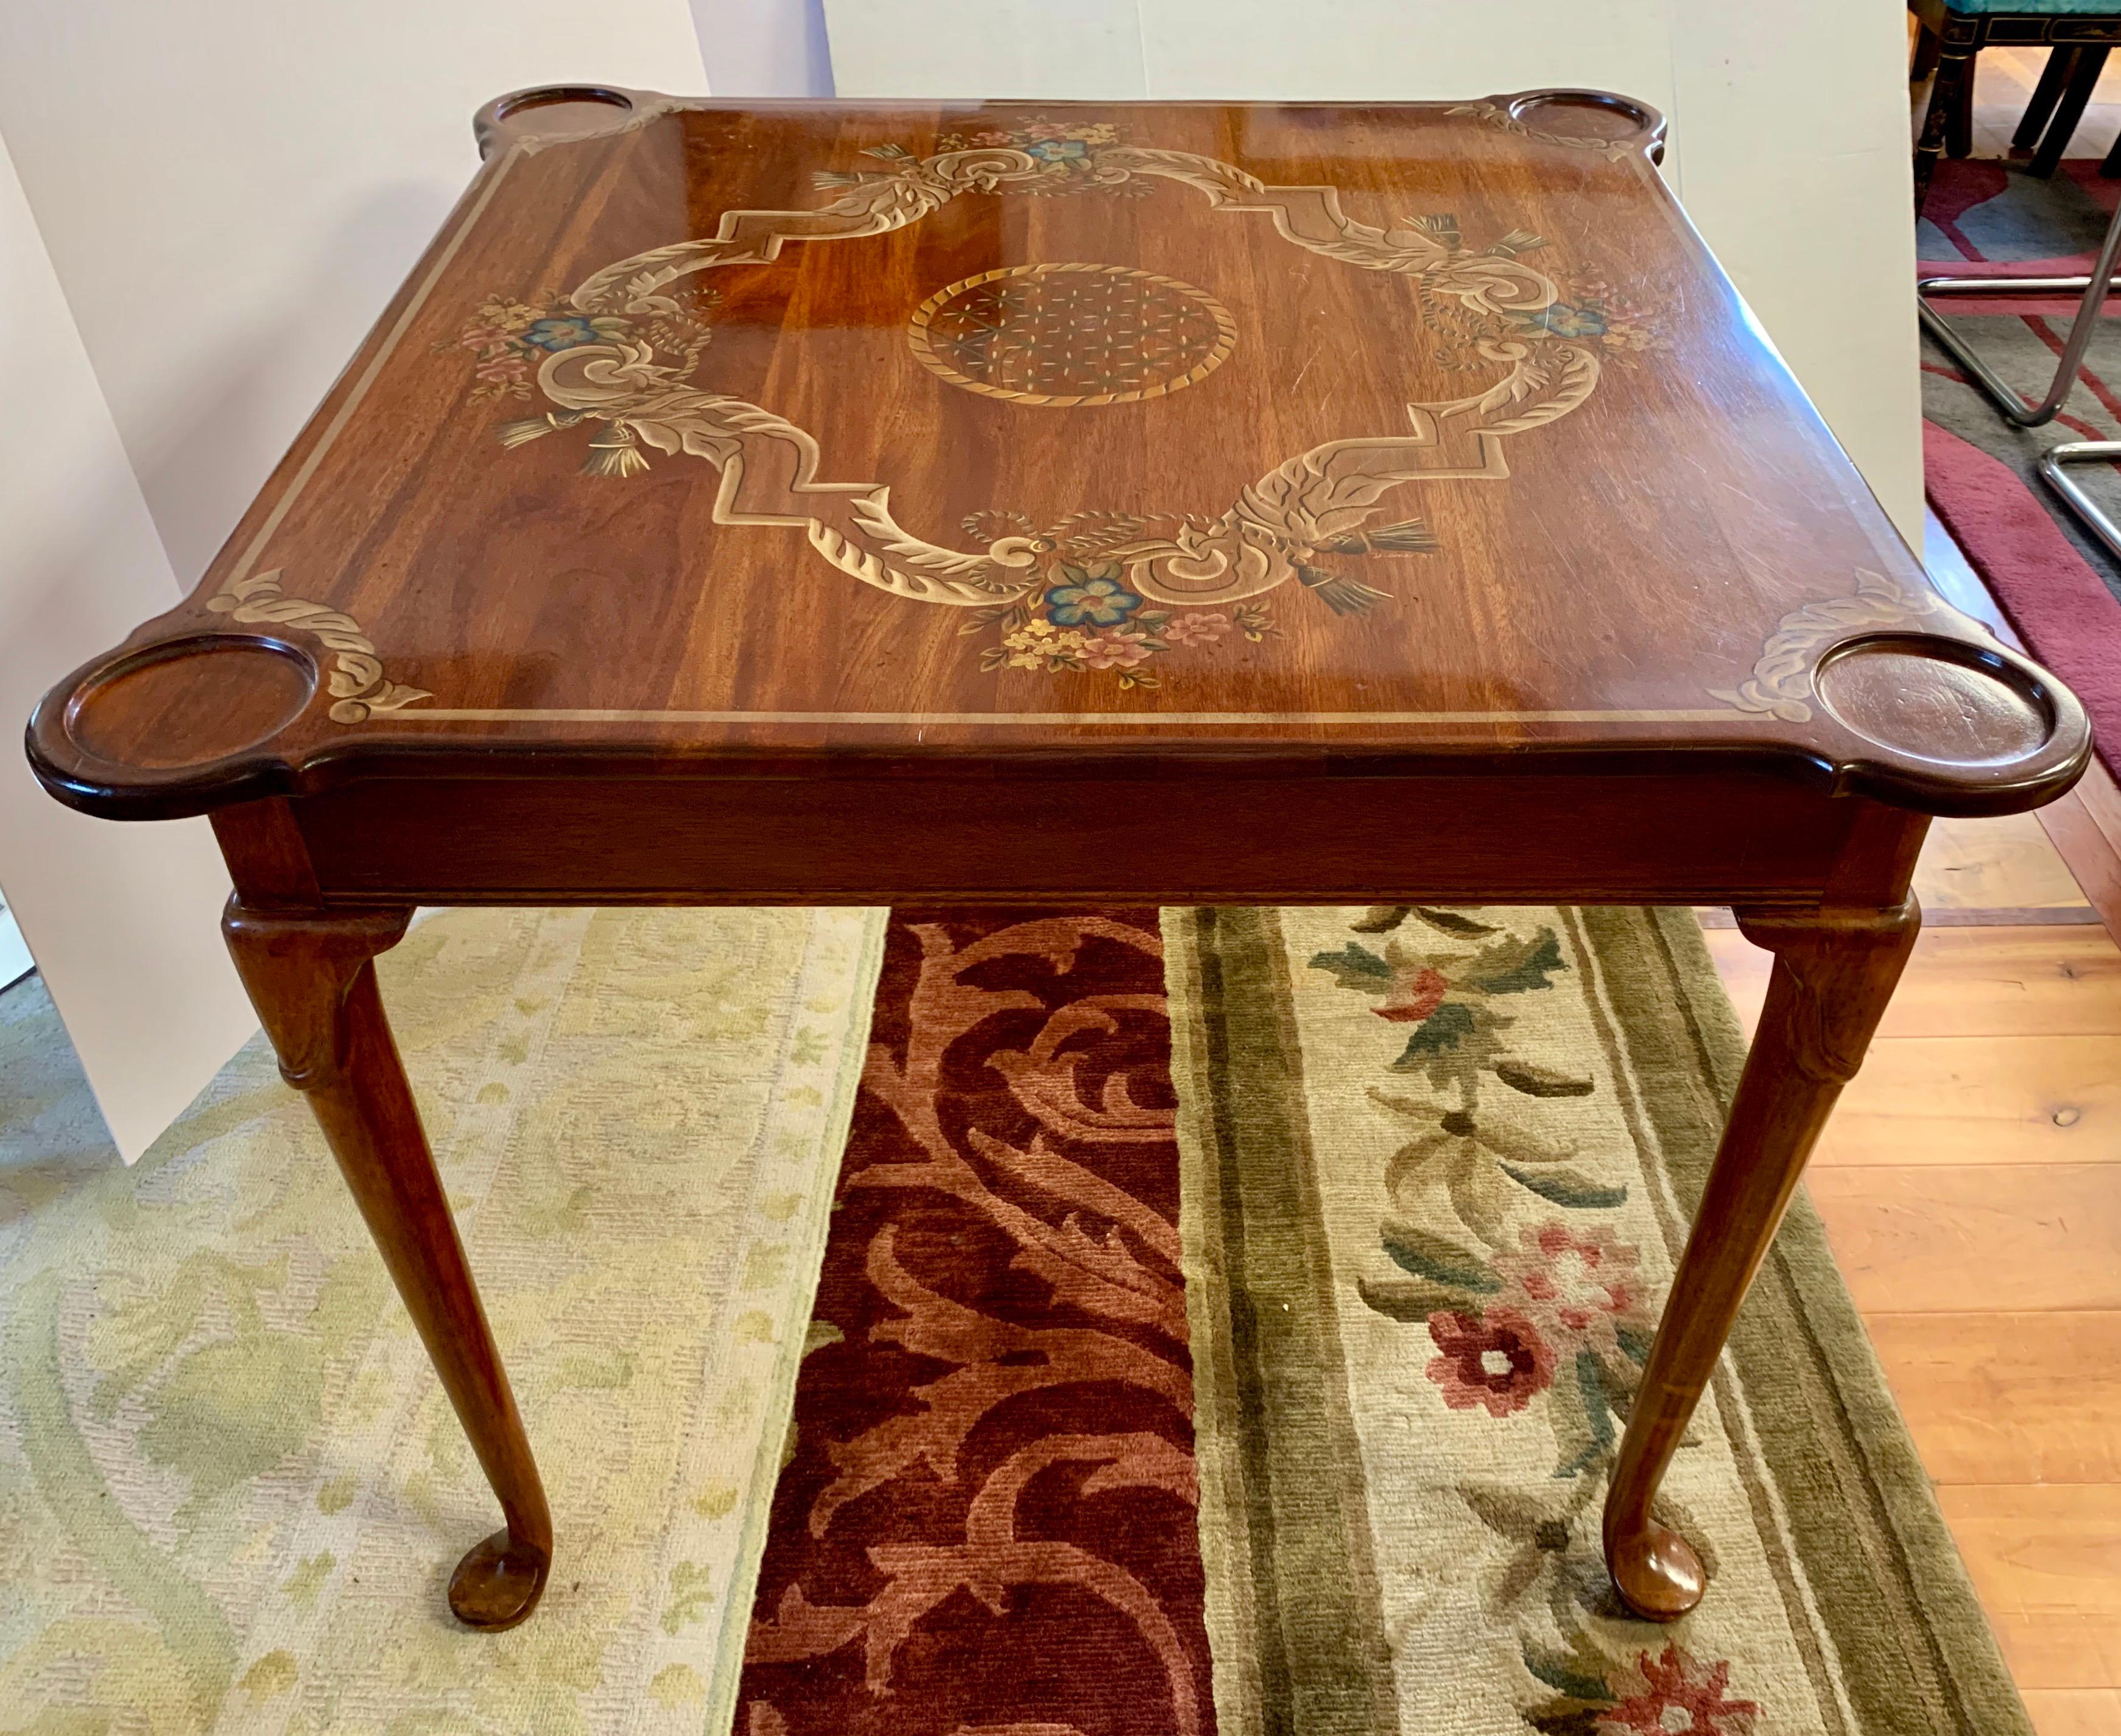 Exquisite hand painted square game table with curved edges for beverages or game pieces. Intricate hand painted design at top.